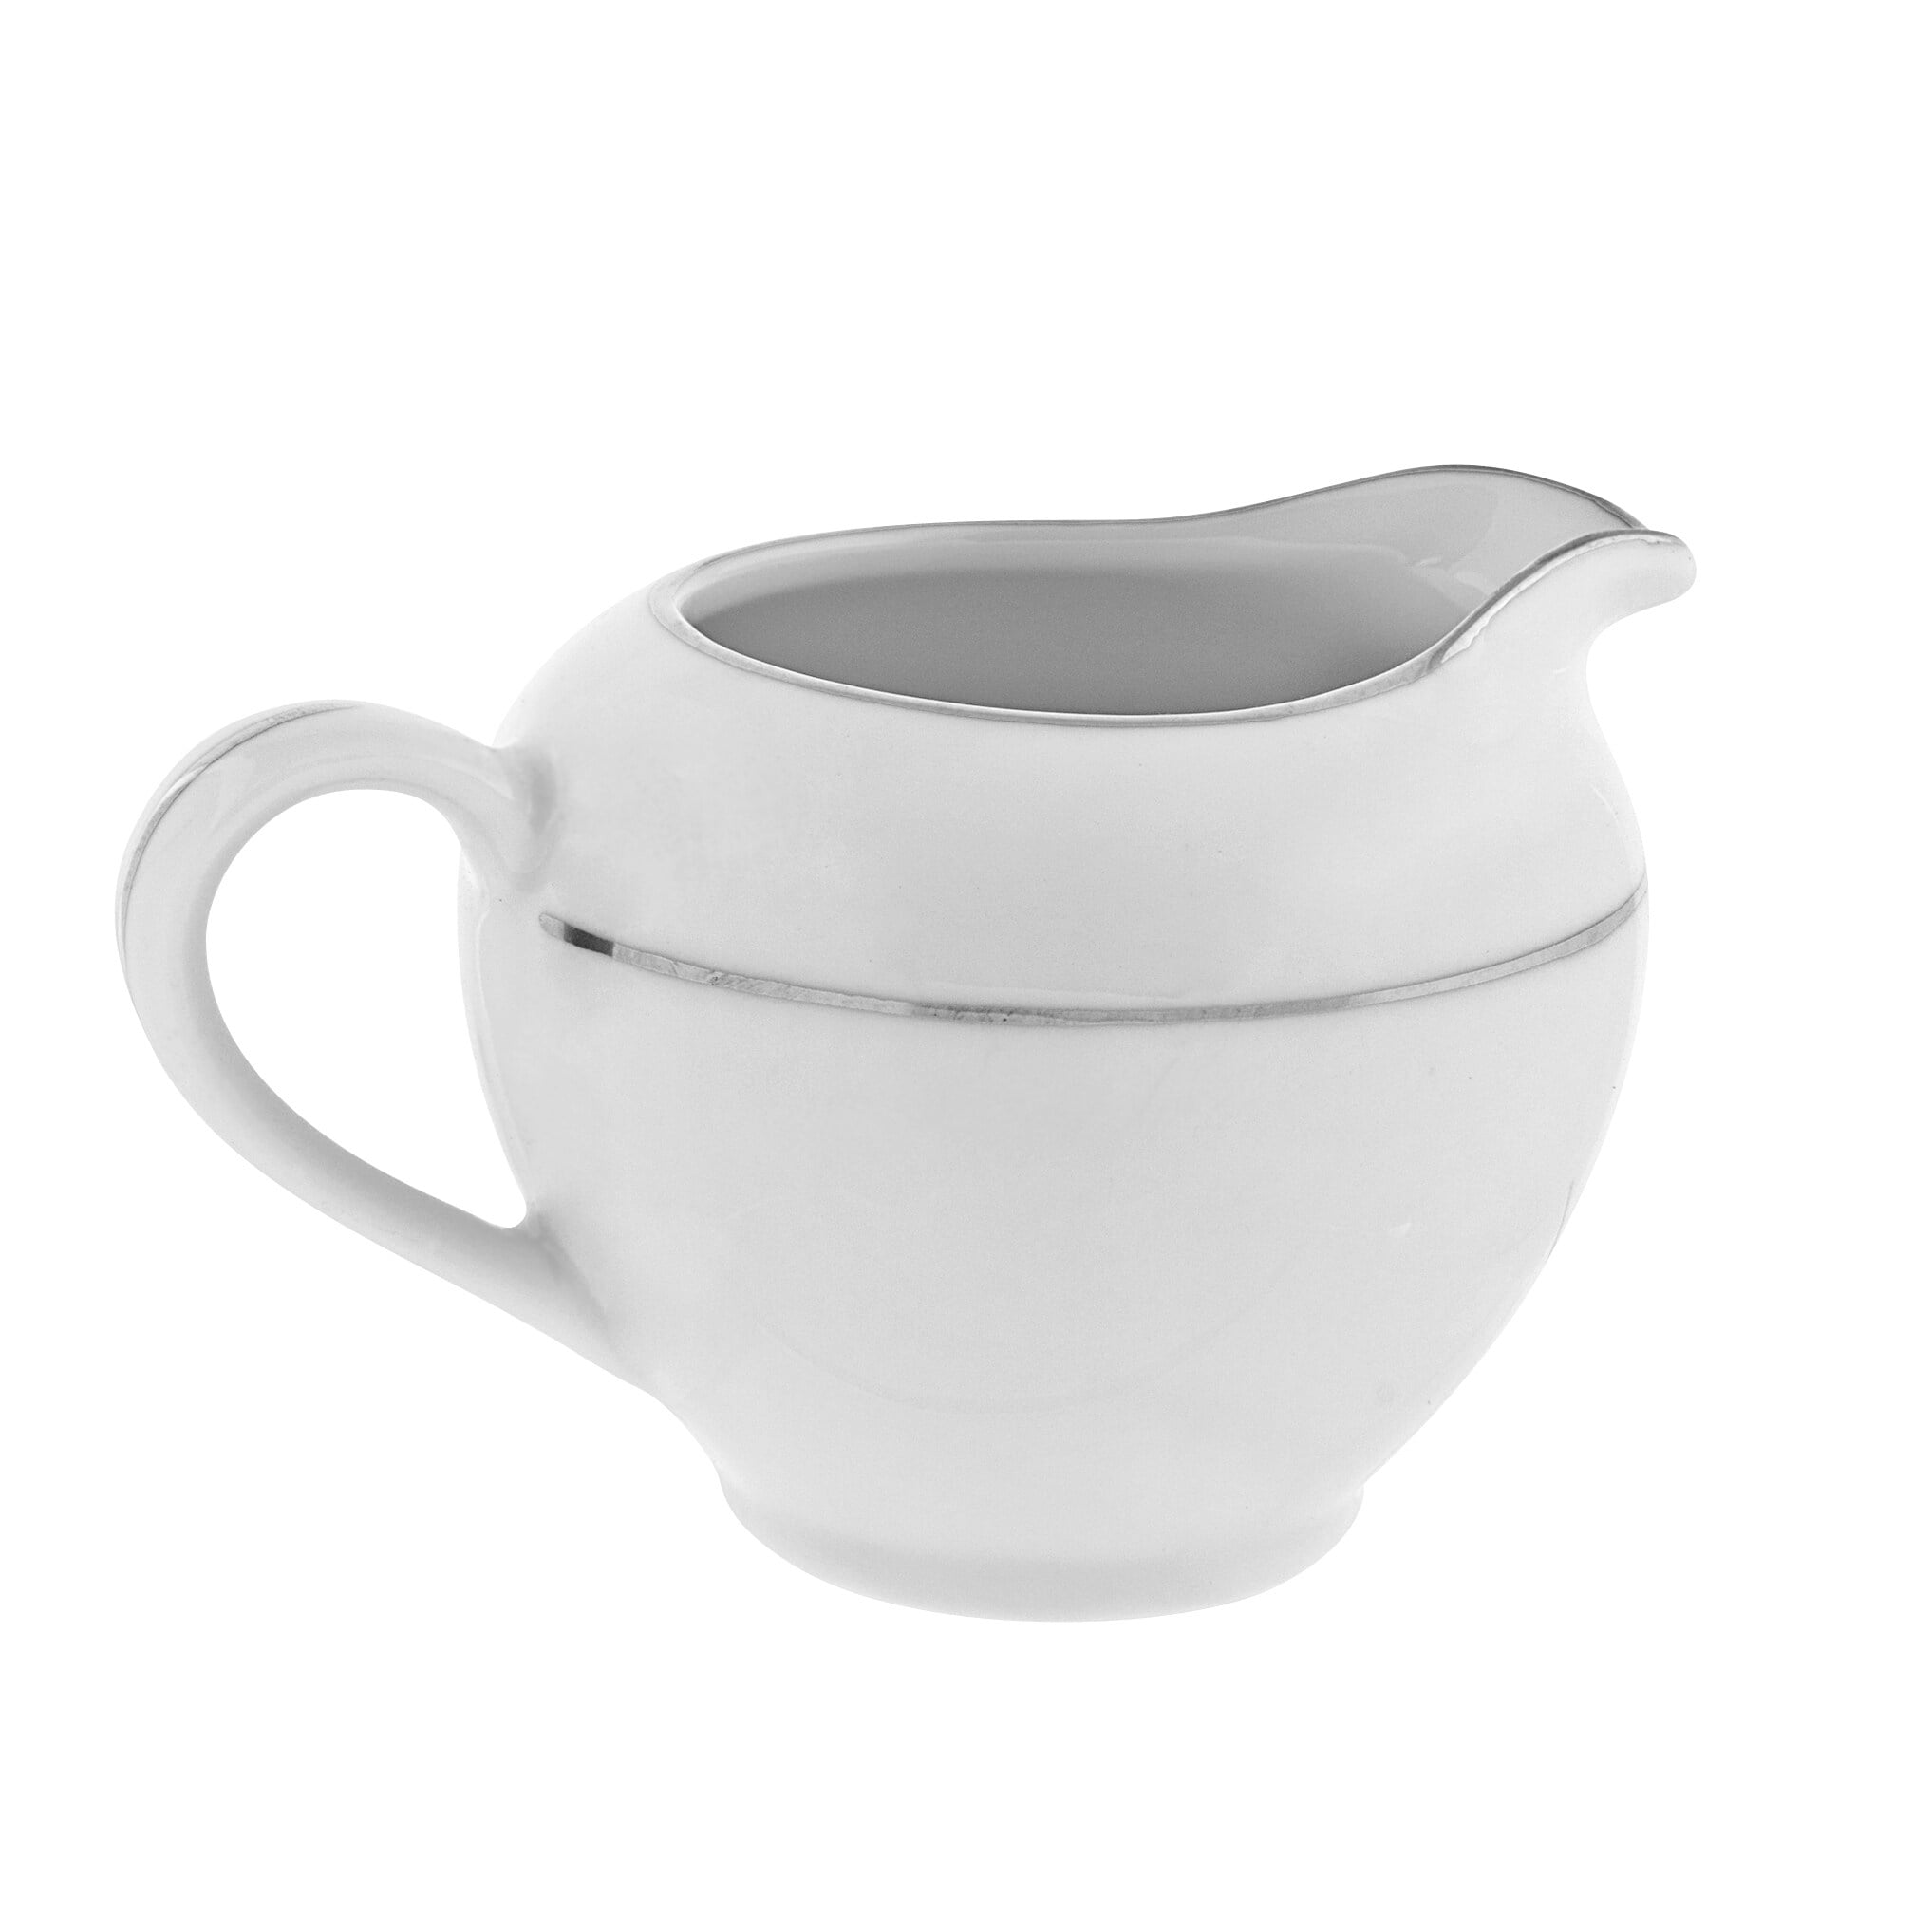 HIC Kitchen Creamer Pitcher with Handle, Fine White Porcelain, 8-Ounces,  Set of 2